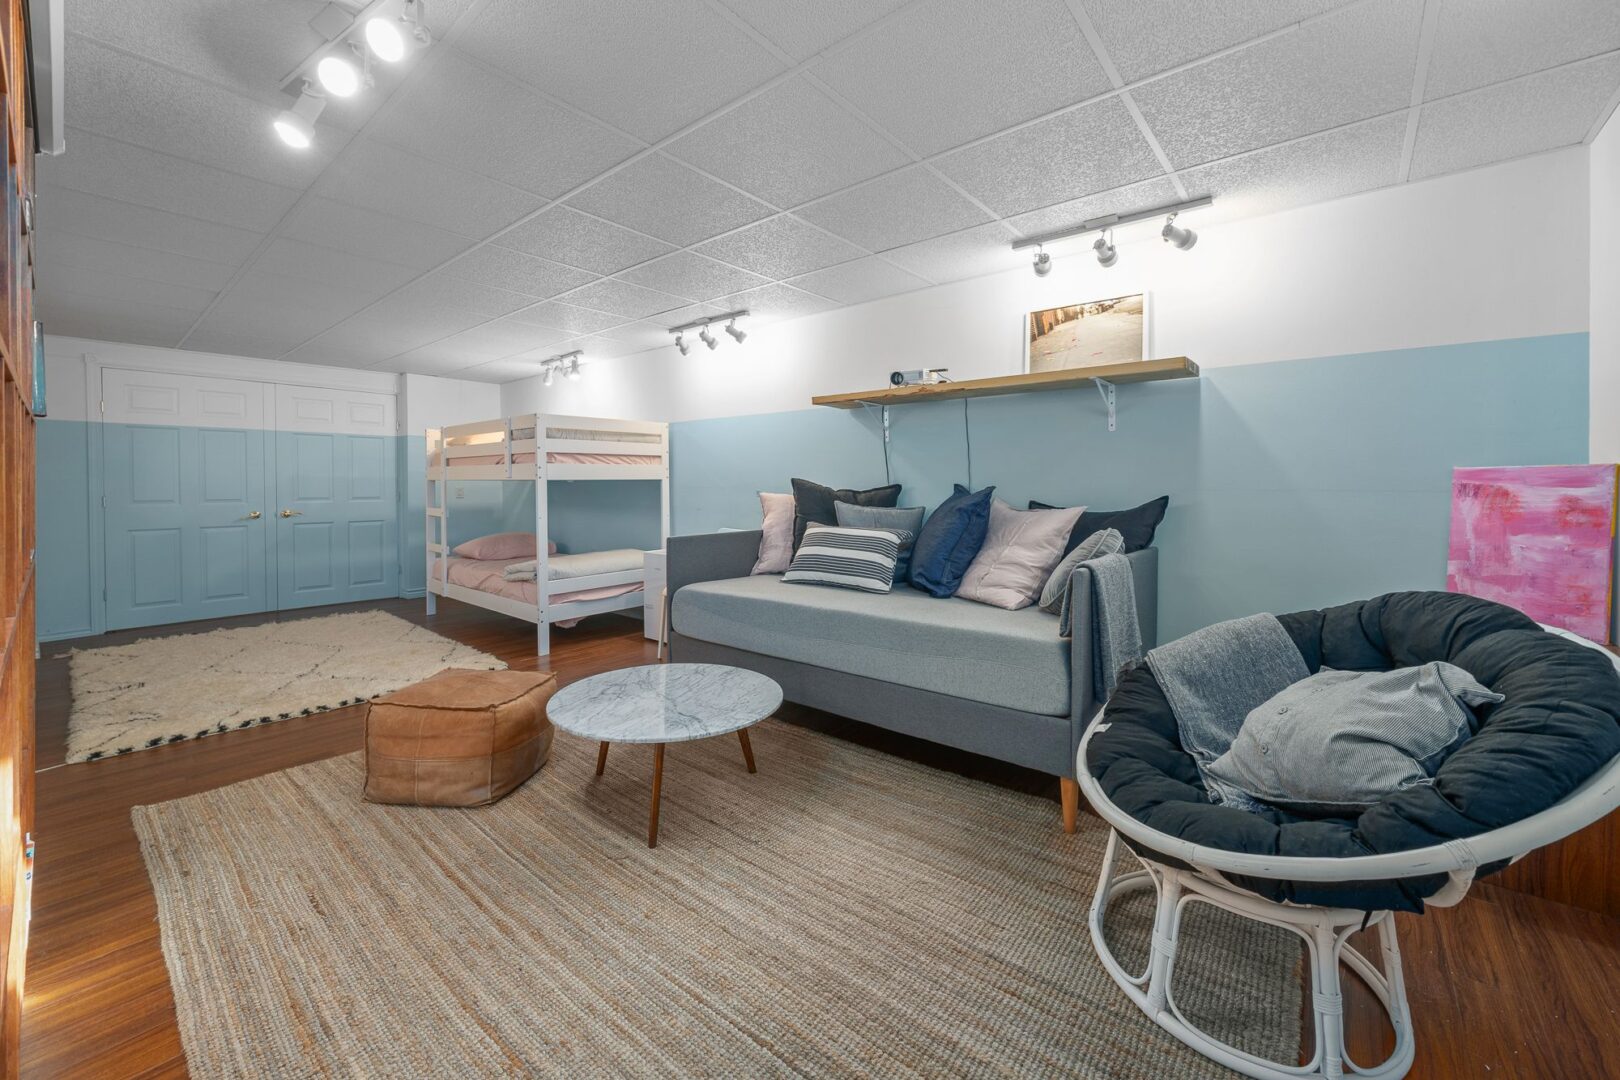 A finished basement area with lots of seating, light blue walls, and bunk beds.